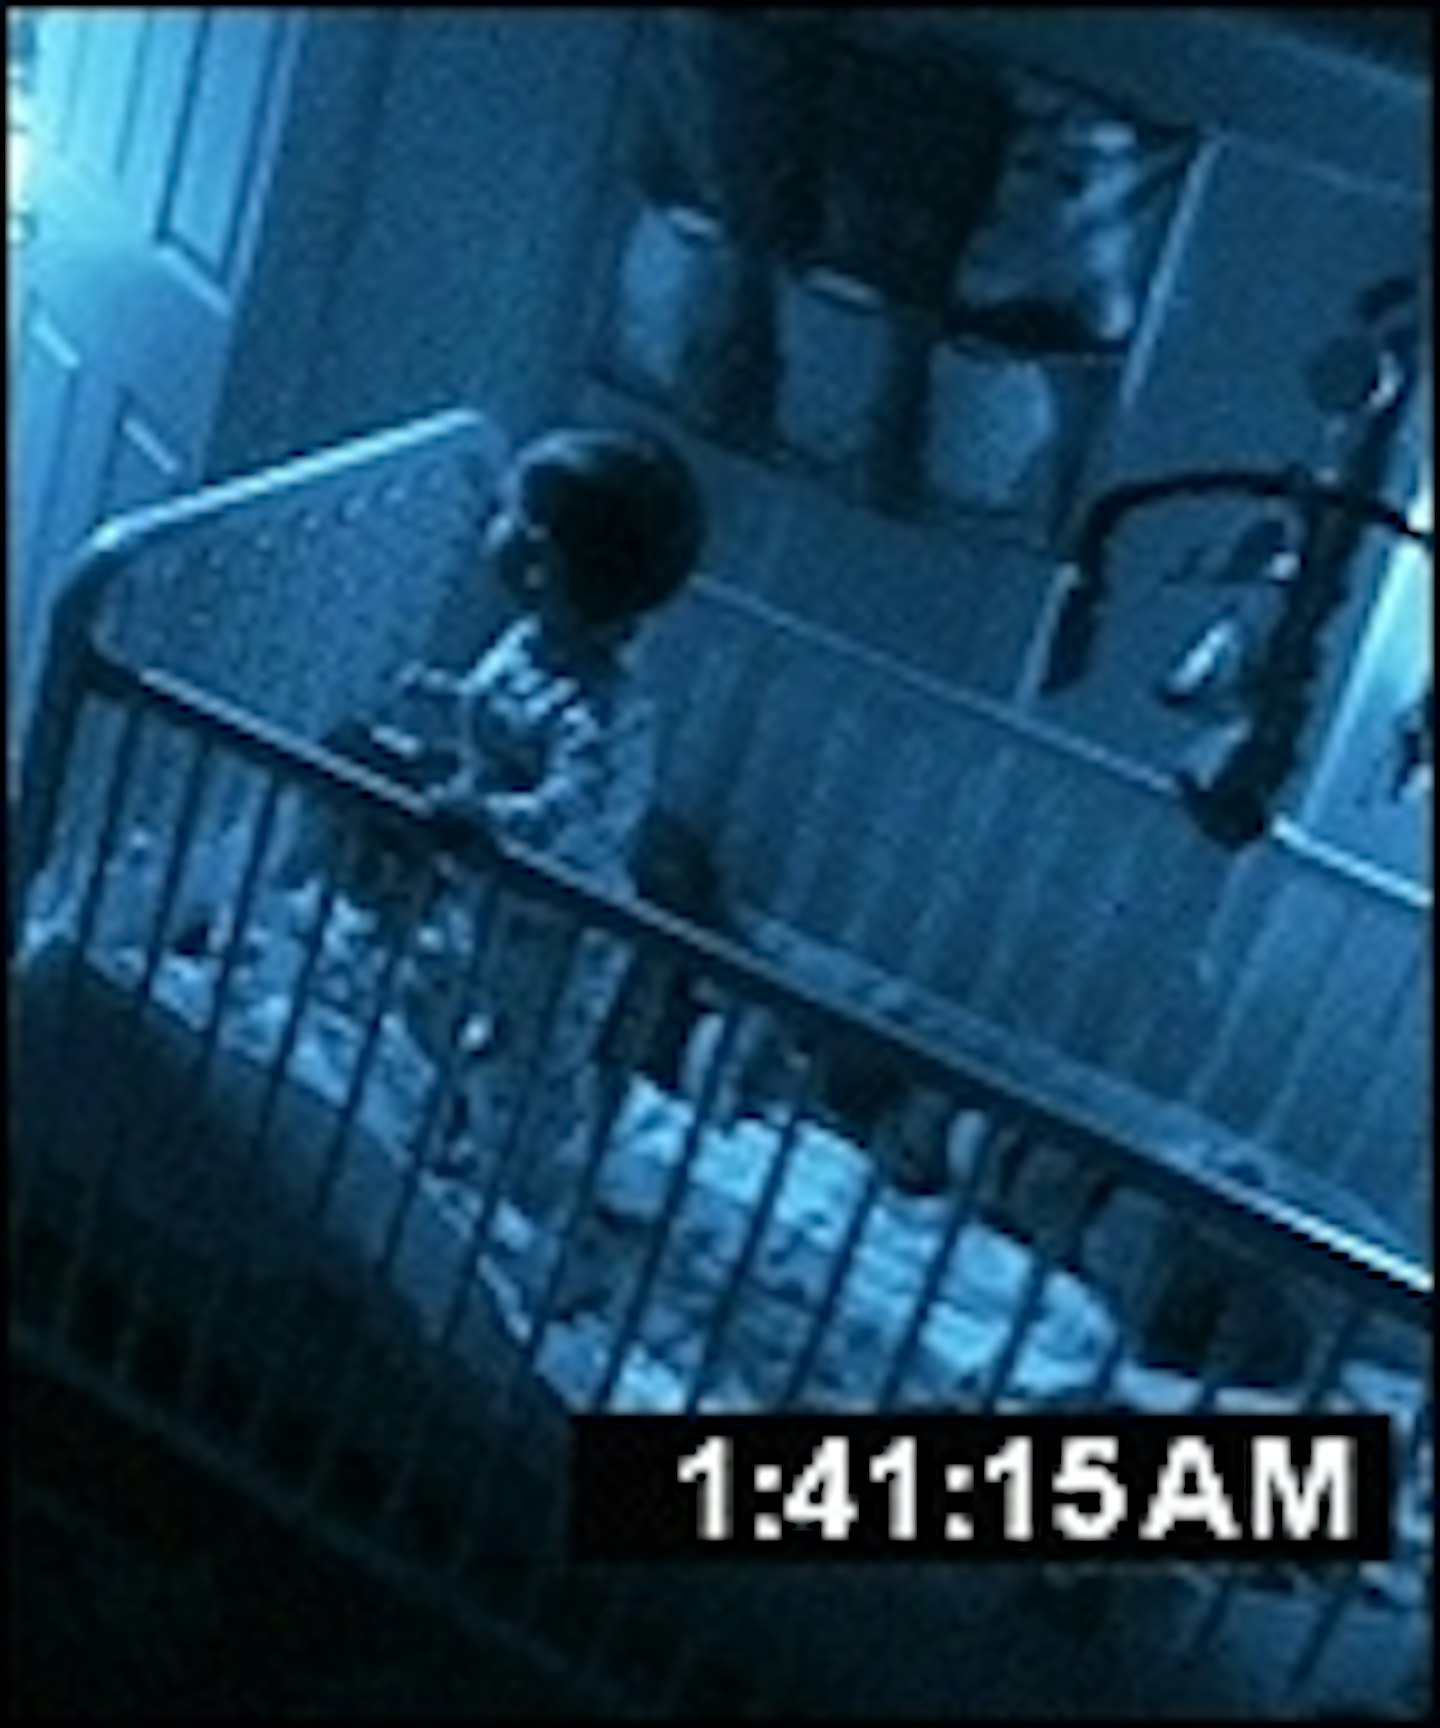 paranormal activity 4 katie and hunter